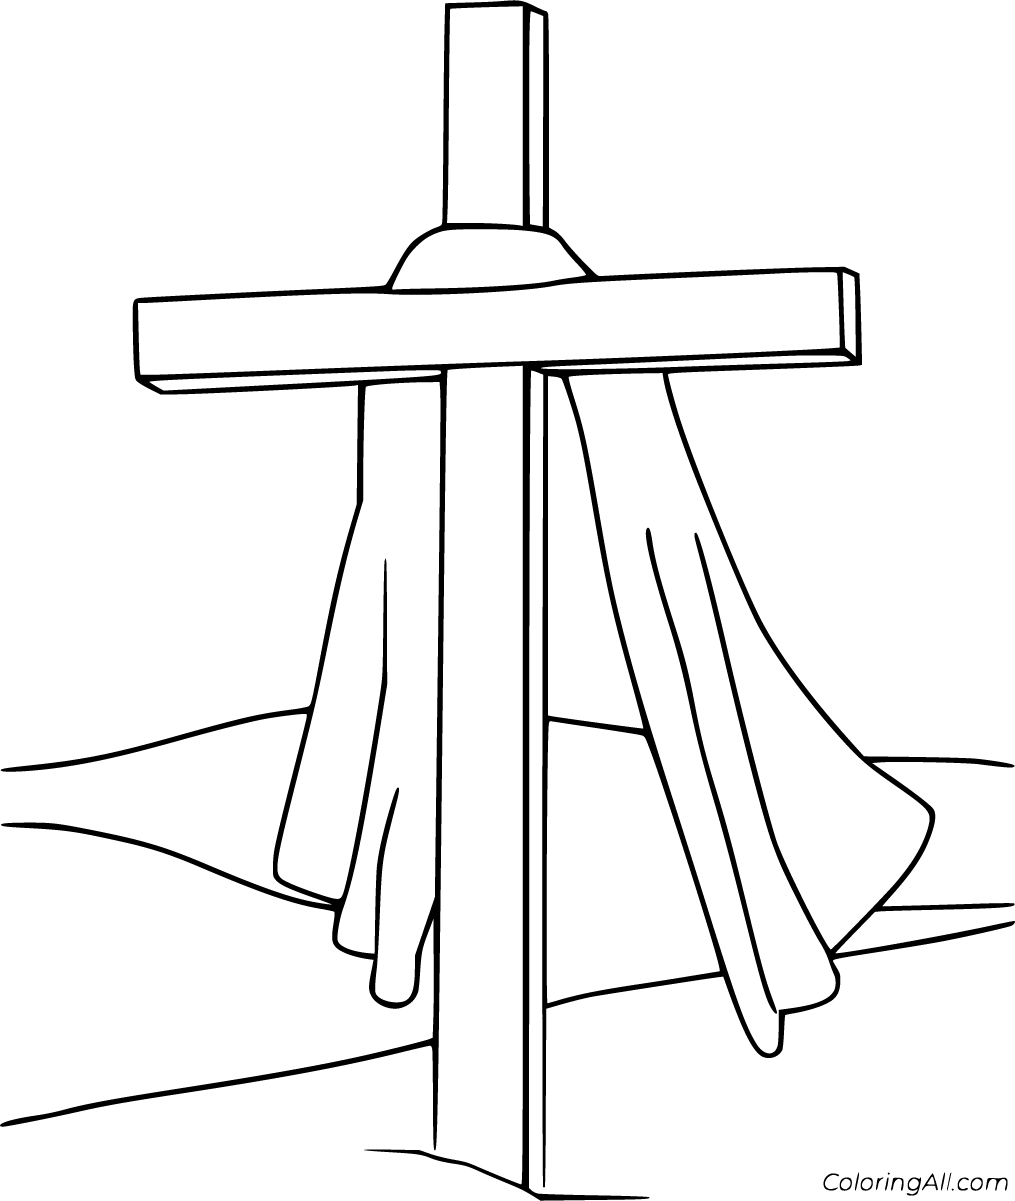 Easter Cross Coloring Pages - ColoringAll